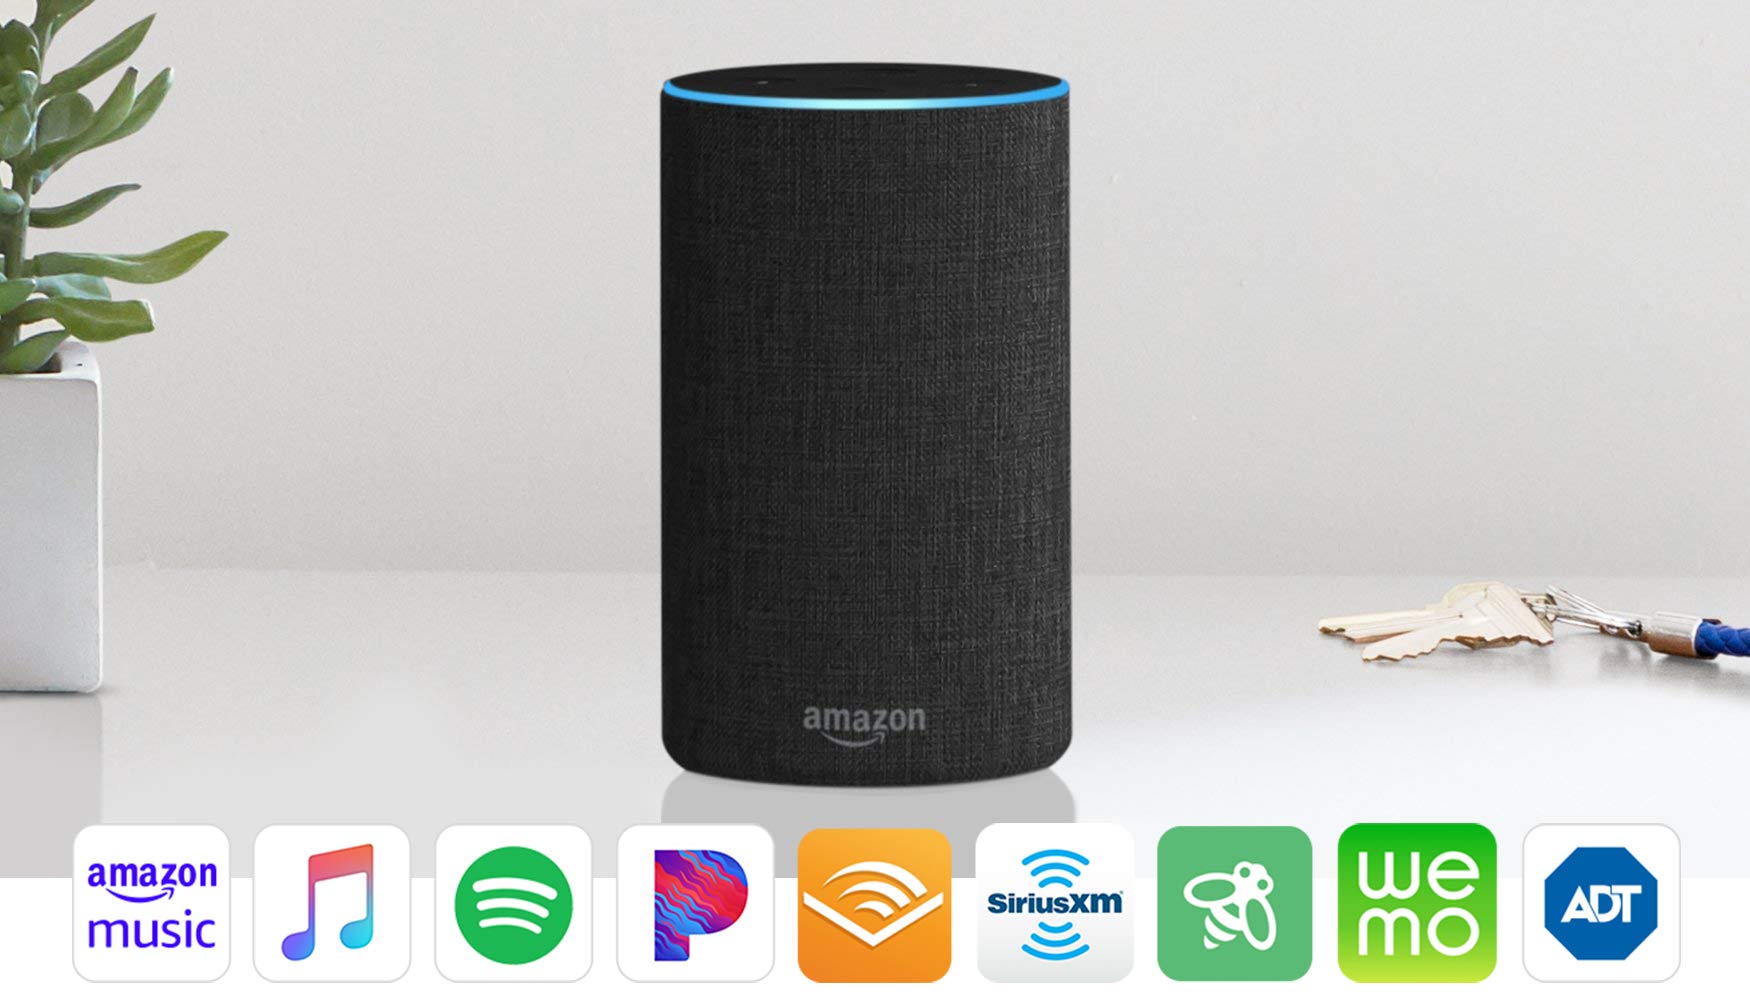 Echo (2nd Generation) - Smart speaker with Alexa and Dolby processing - Charcoal Fabric